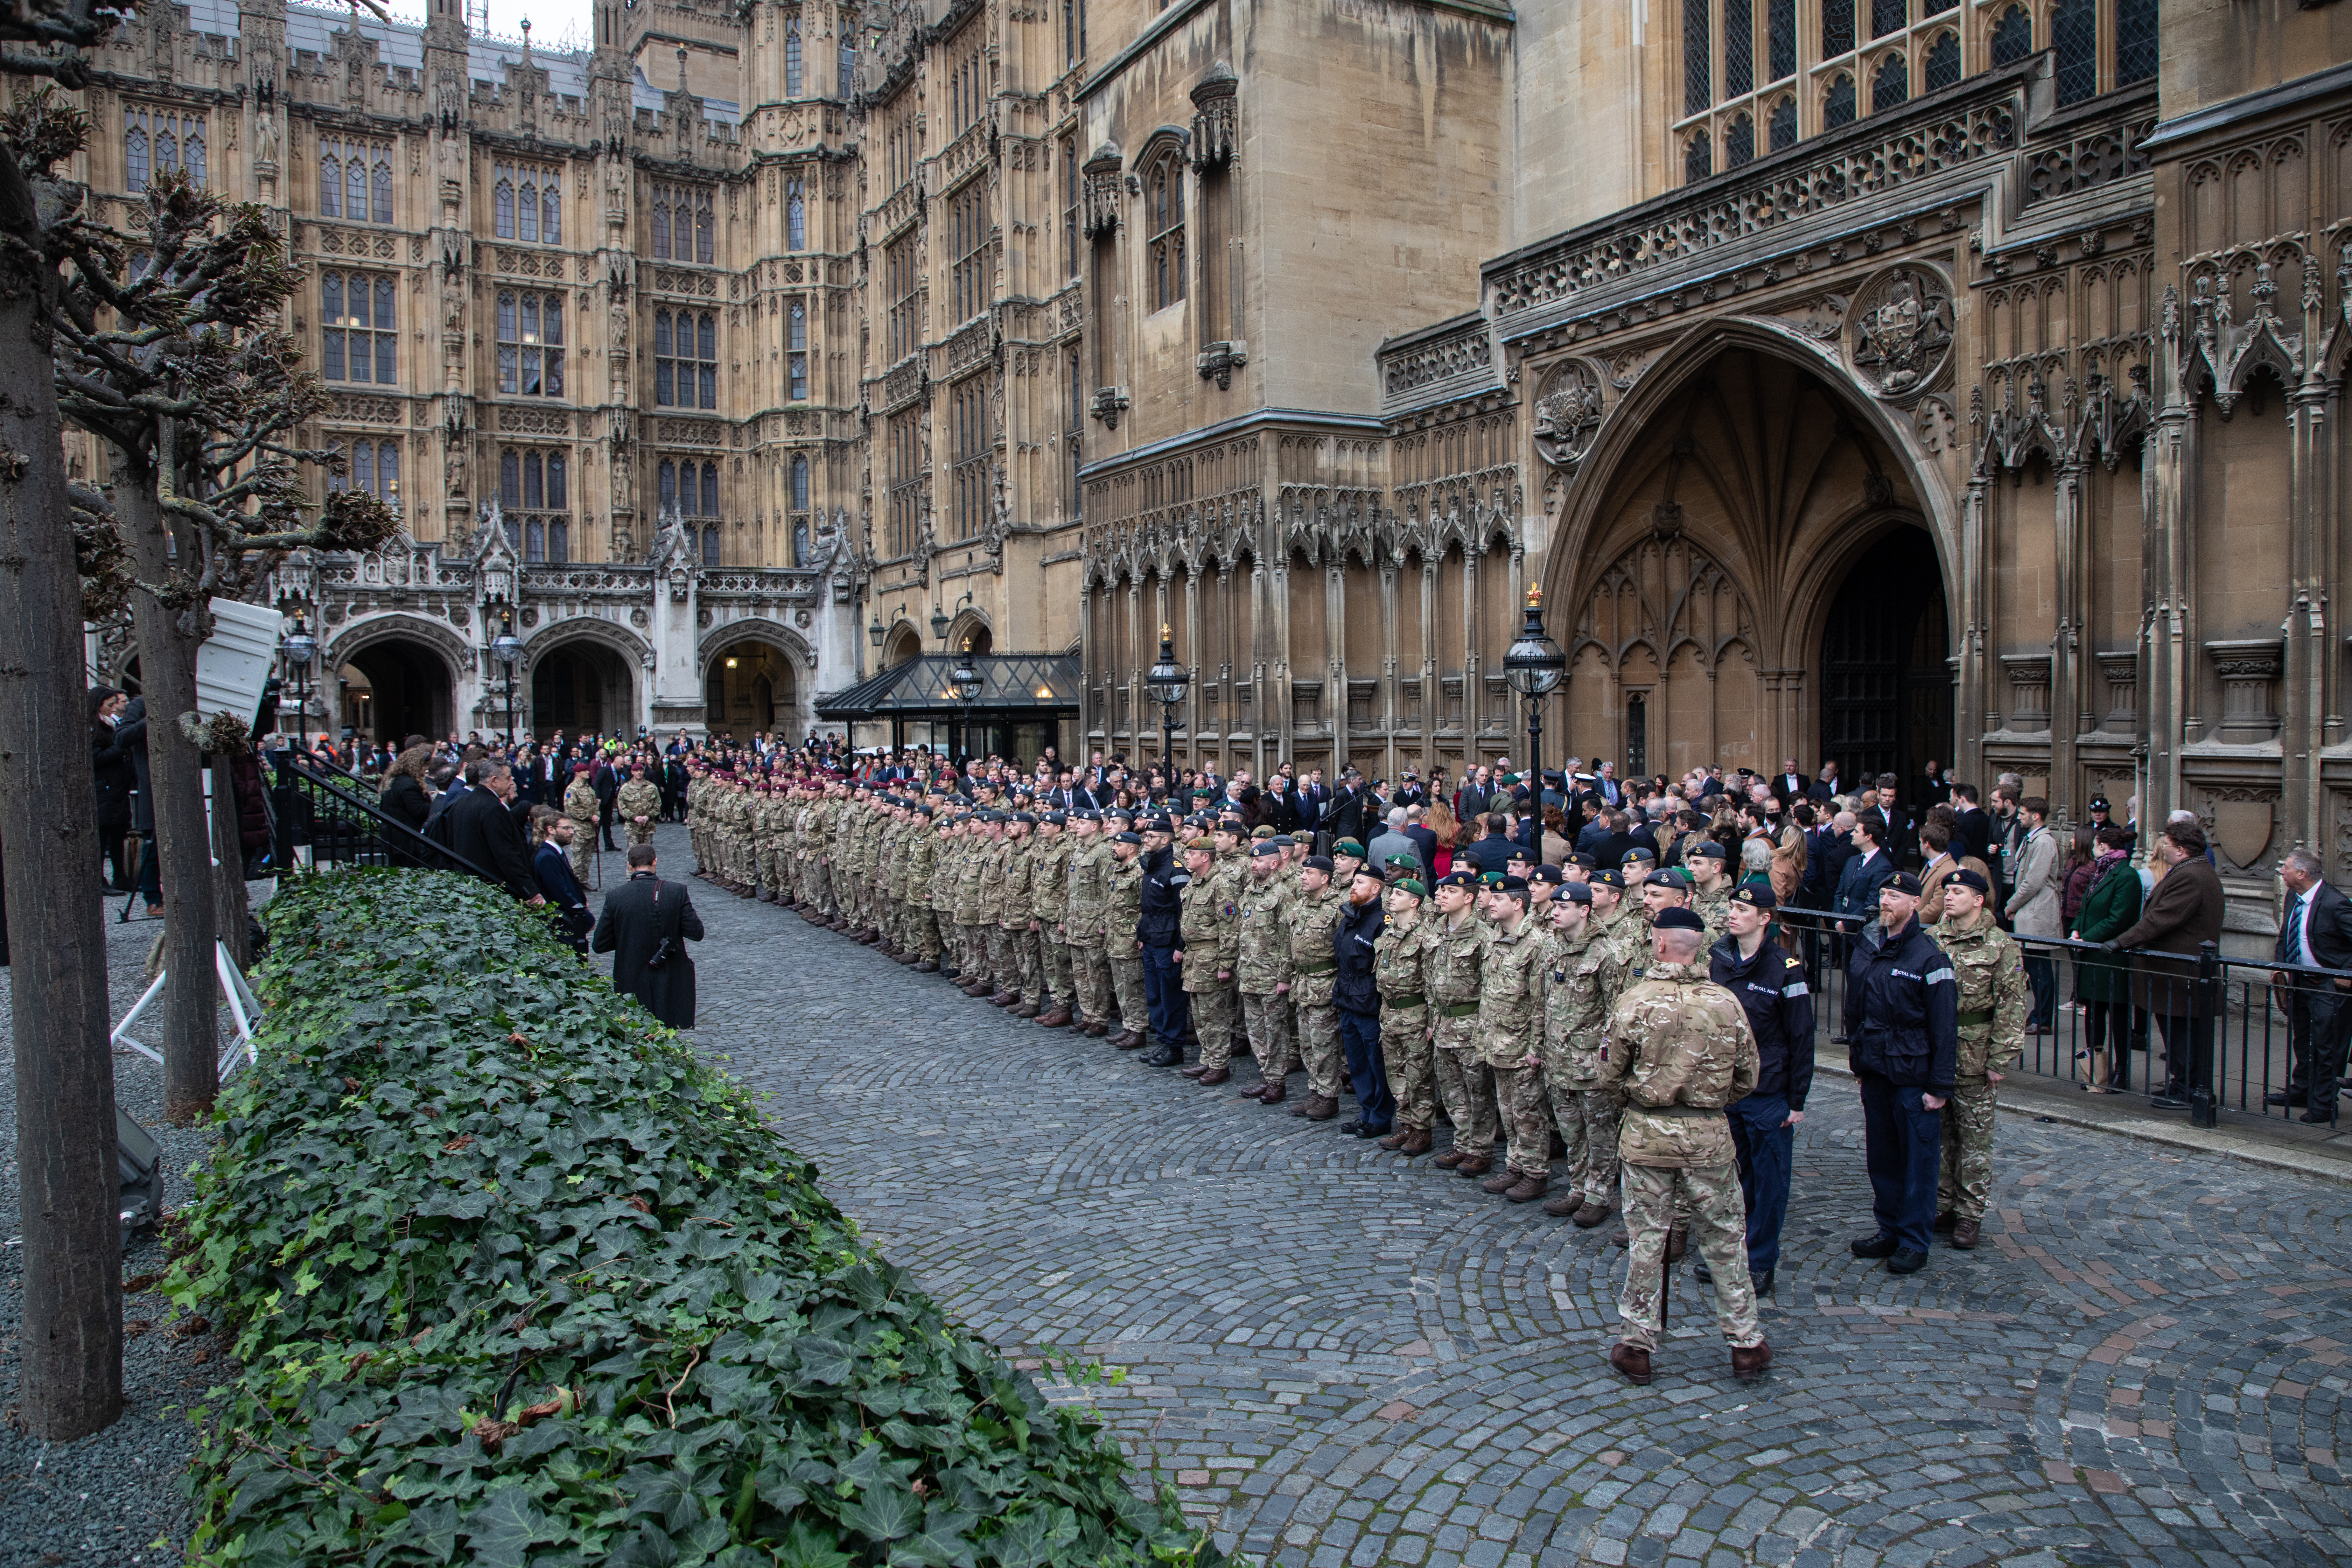 Armed Forces stand outside Parliament with Prime Minister and other notable figures.